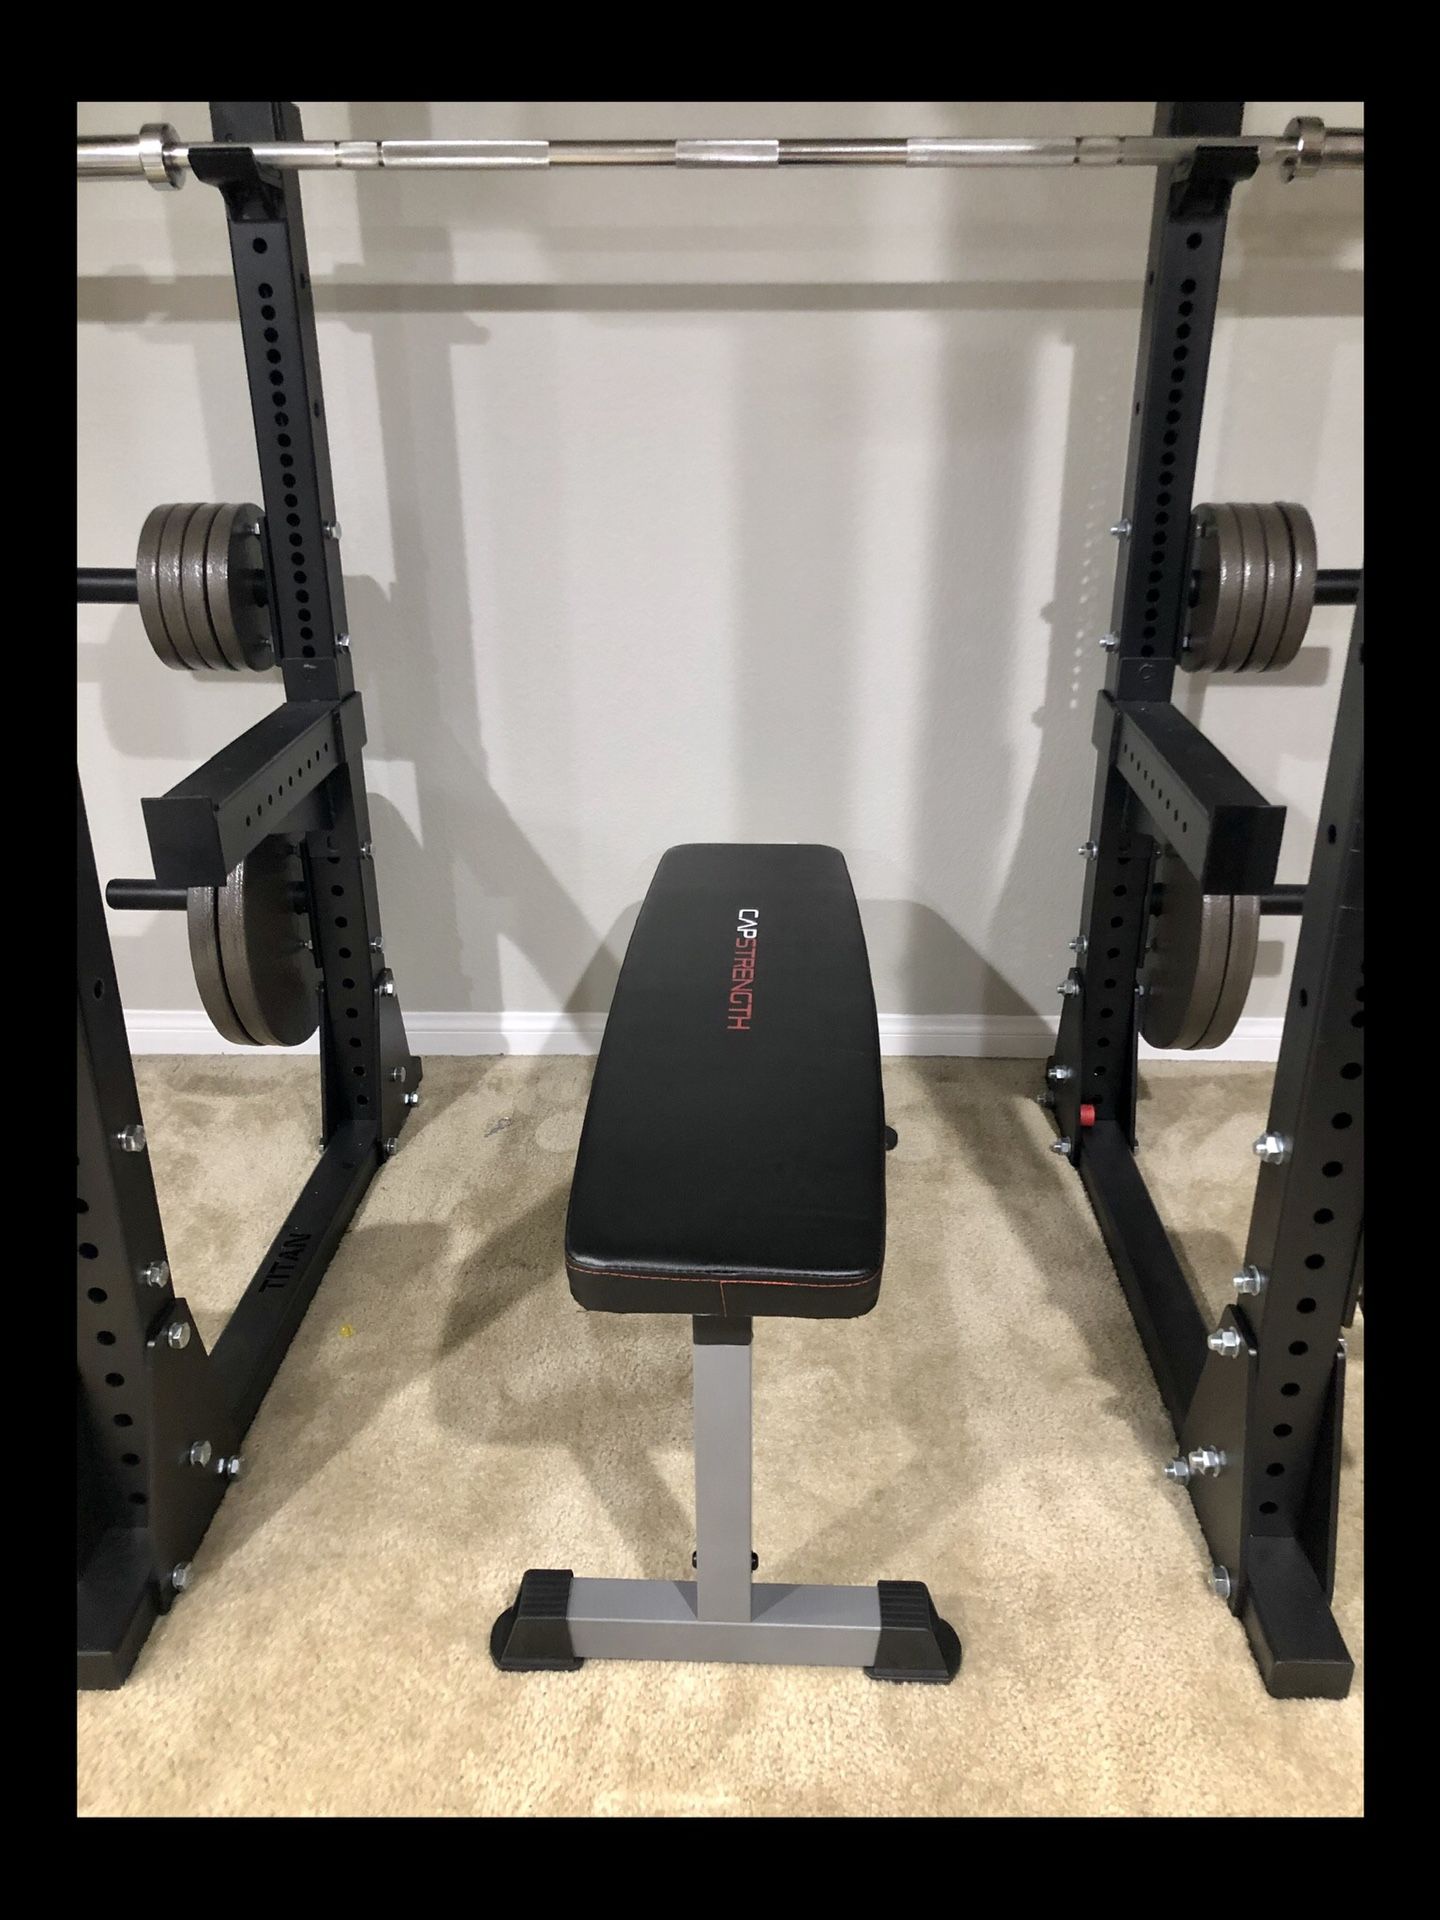 Brand new in box never opened flat utility weight workout bench (not negotiable)